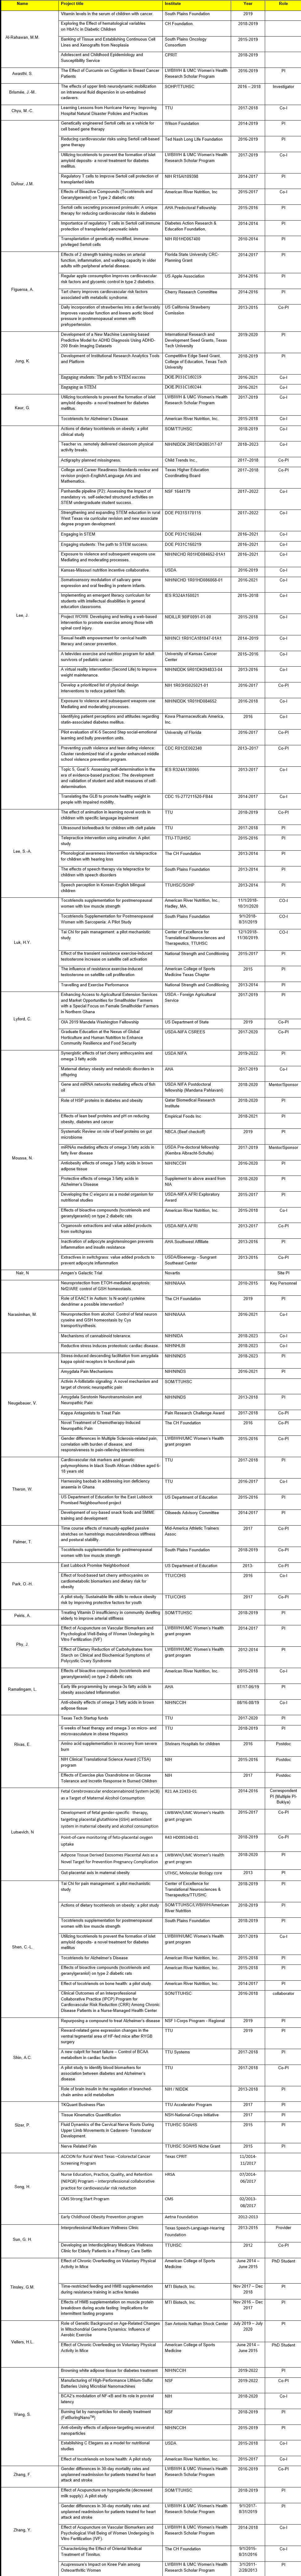 Integrated Health Research Grant Table